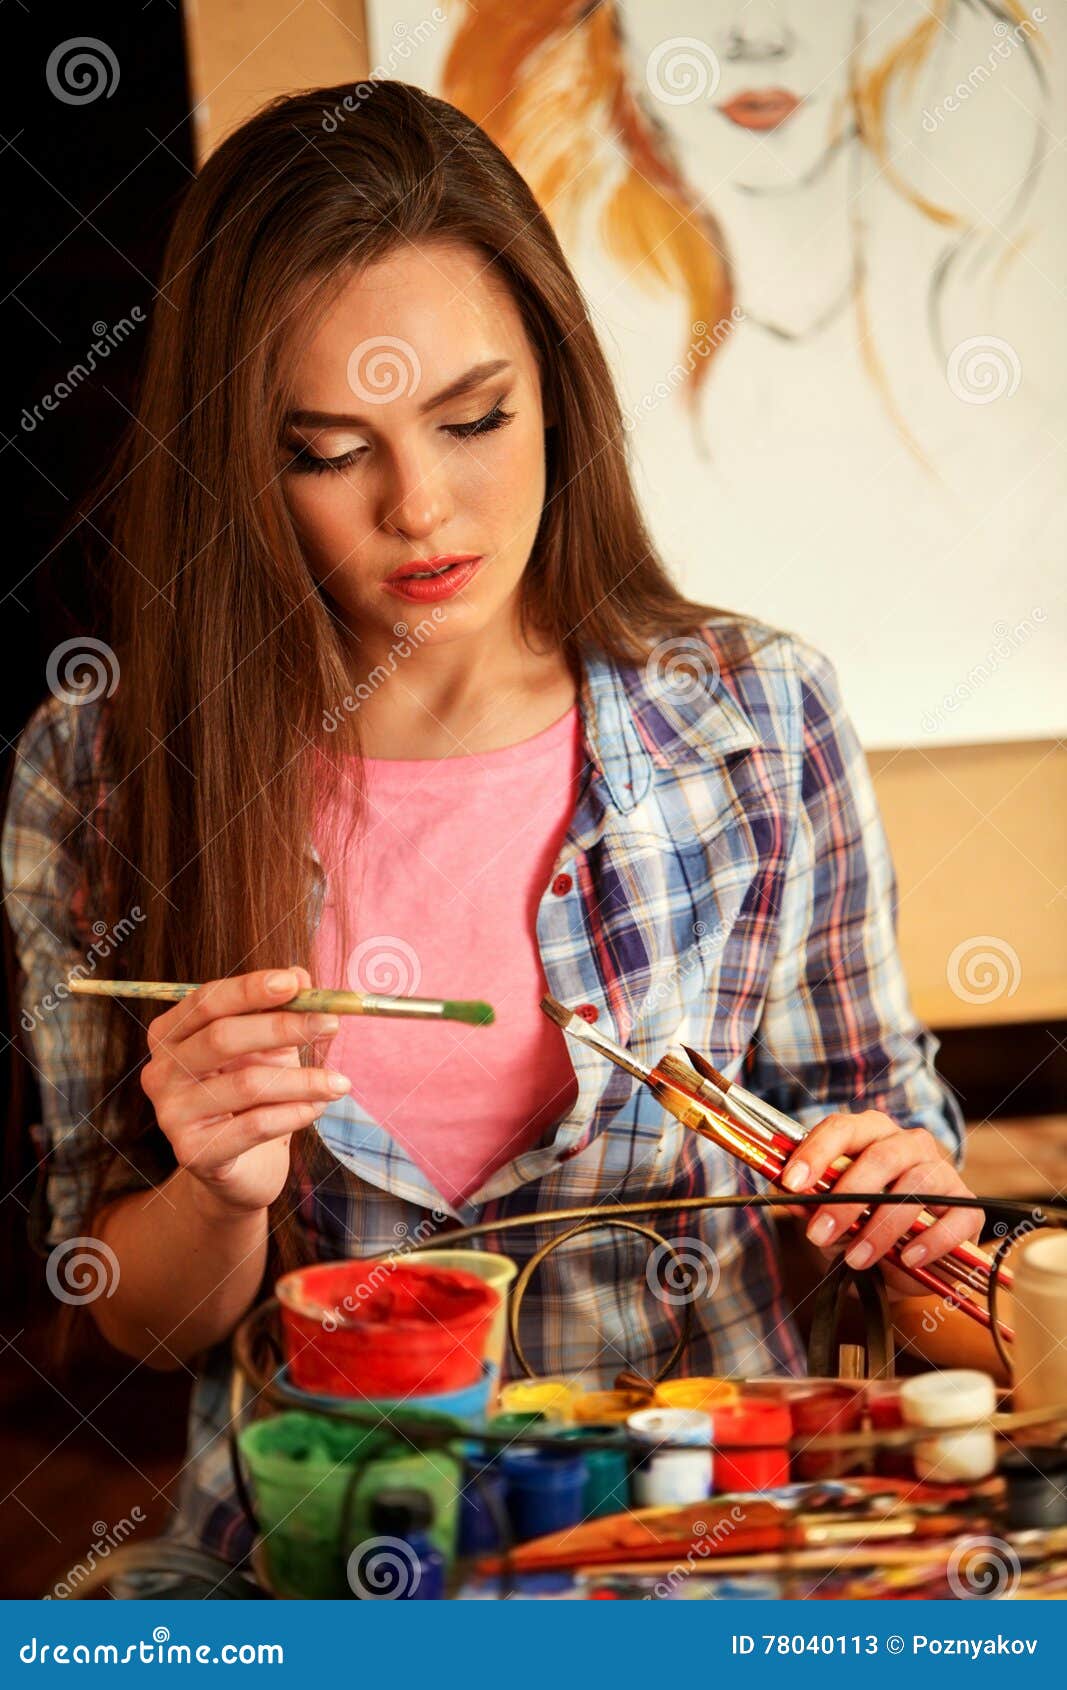 Girl Artist Paints with Painting Brush Stock Image - Image of jeans ...